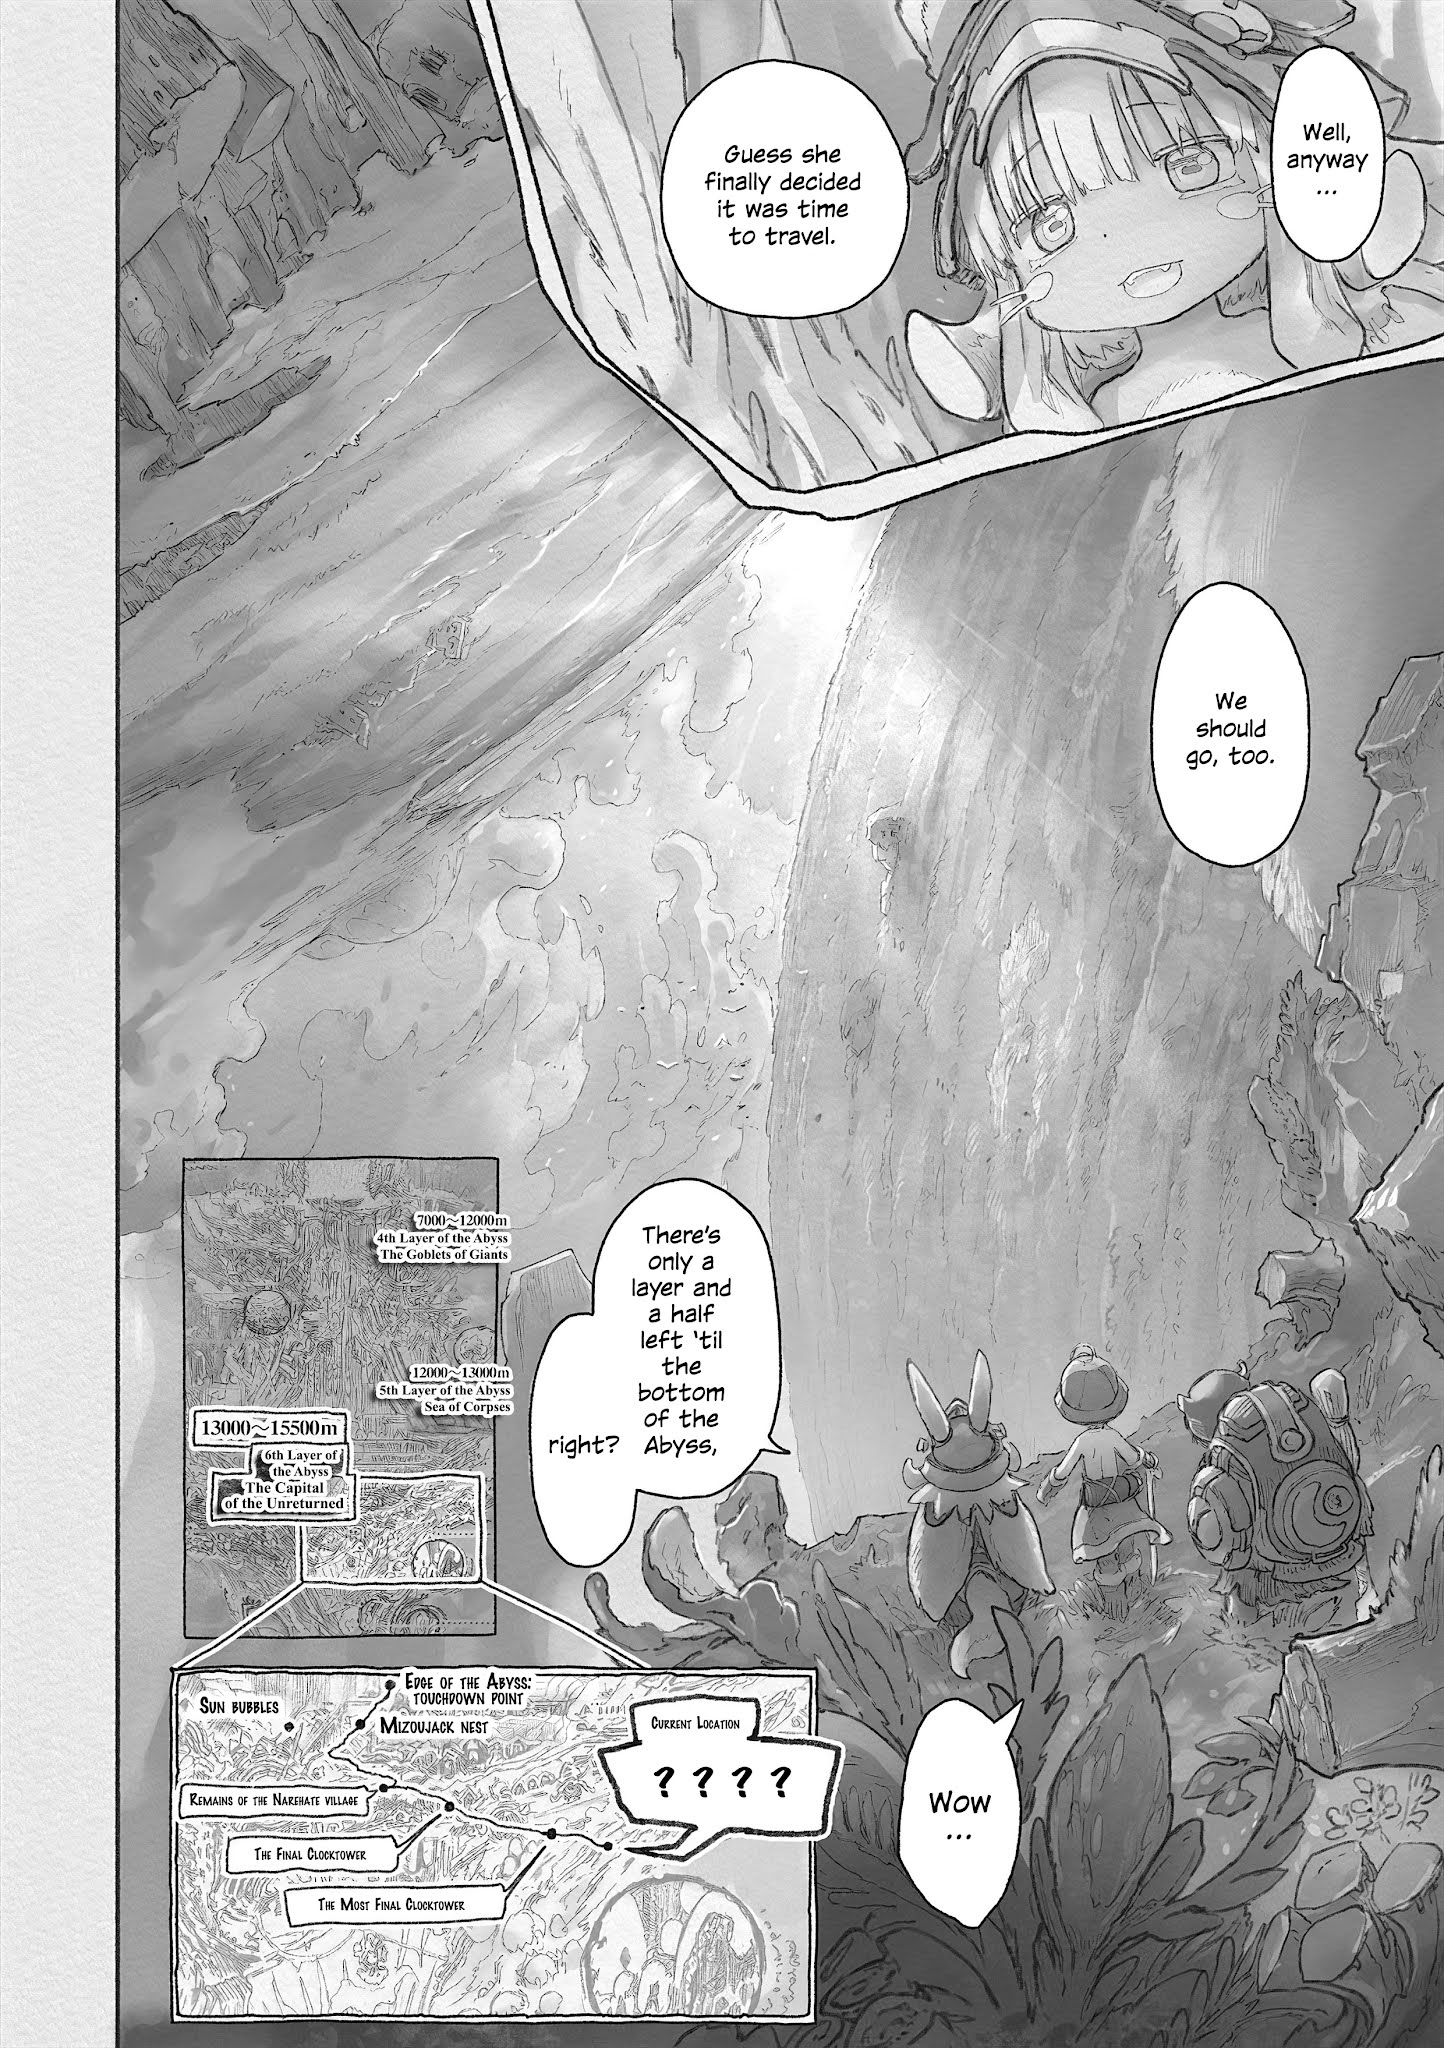 Made in Abyss  Manga 